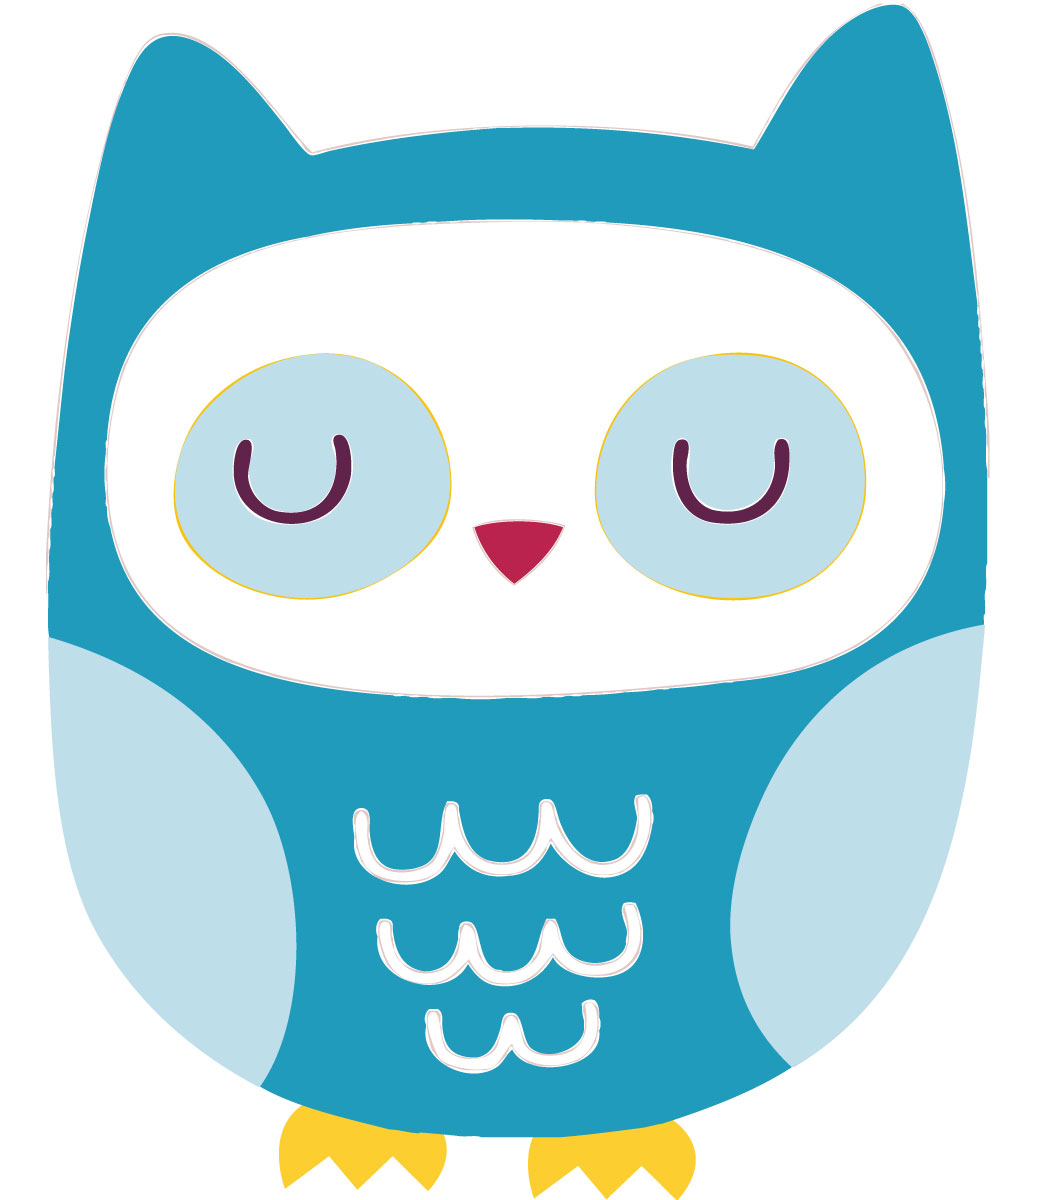 Cute Blue Owl Wall Stickers - Totally Movable and Reusable